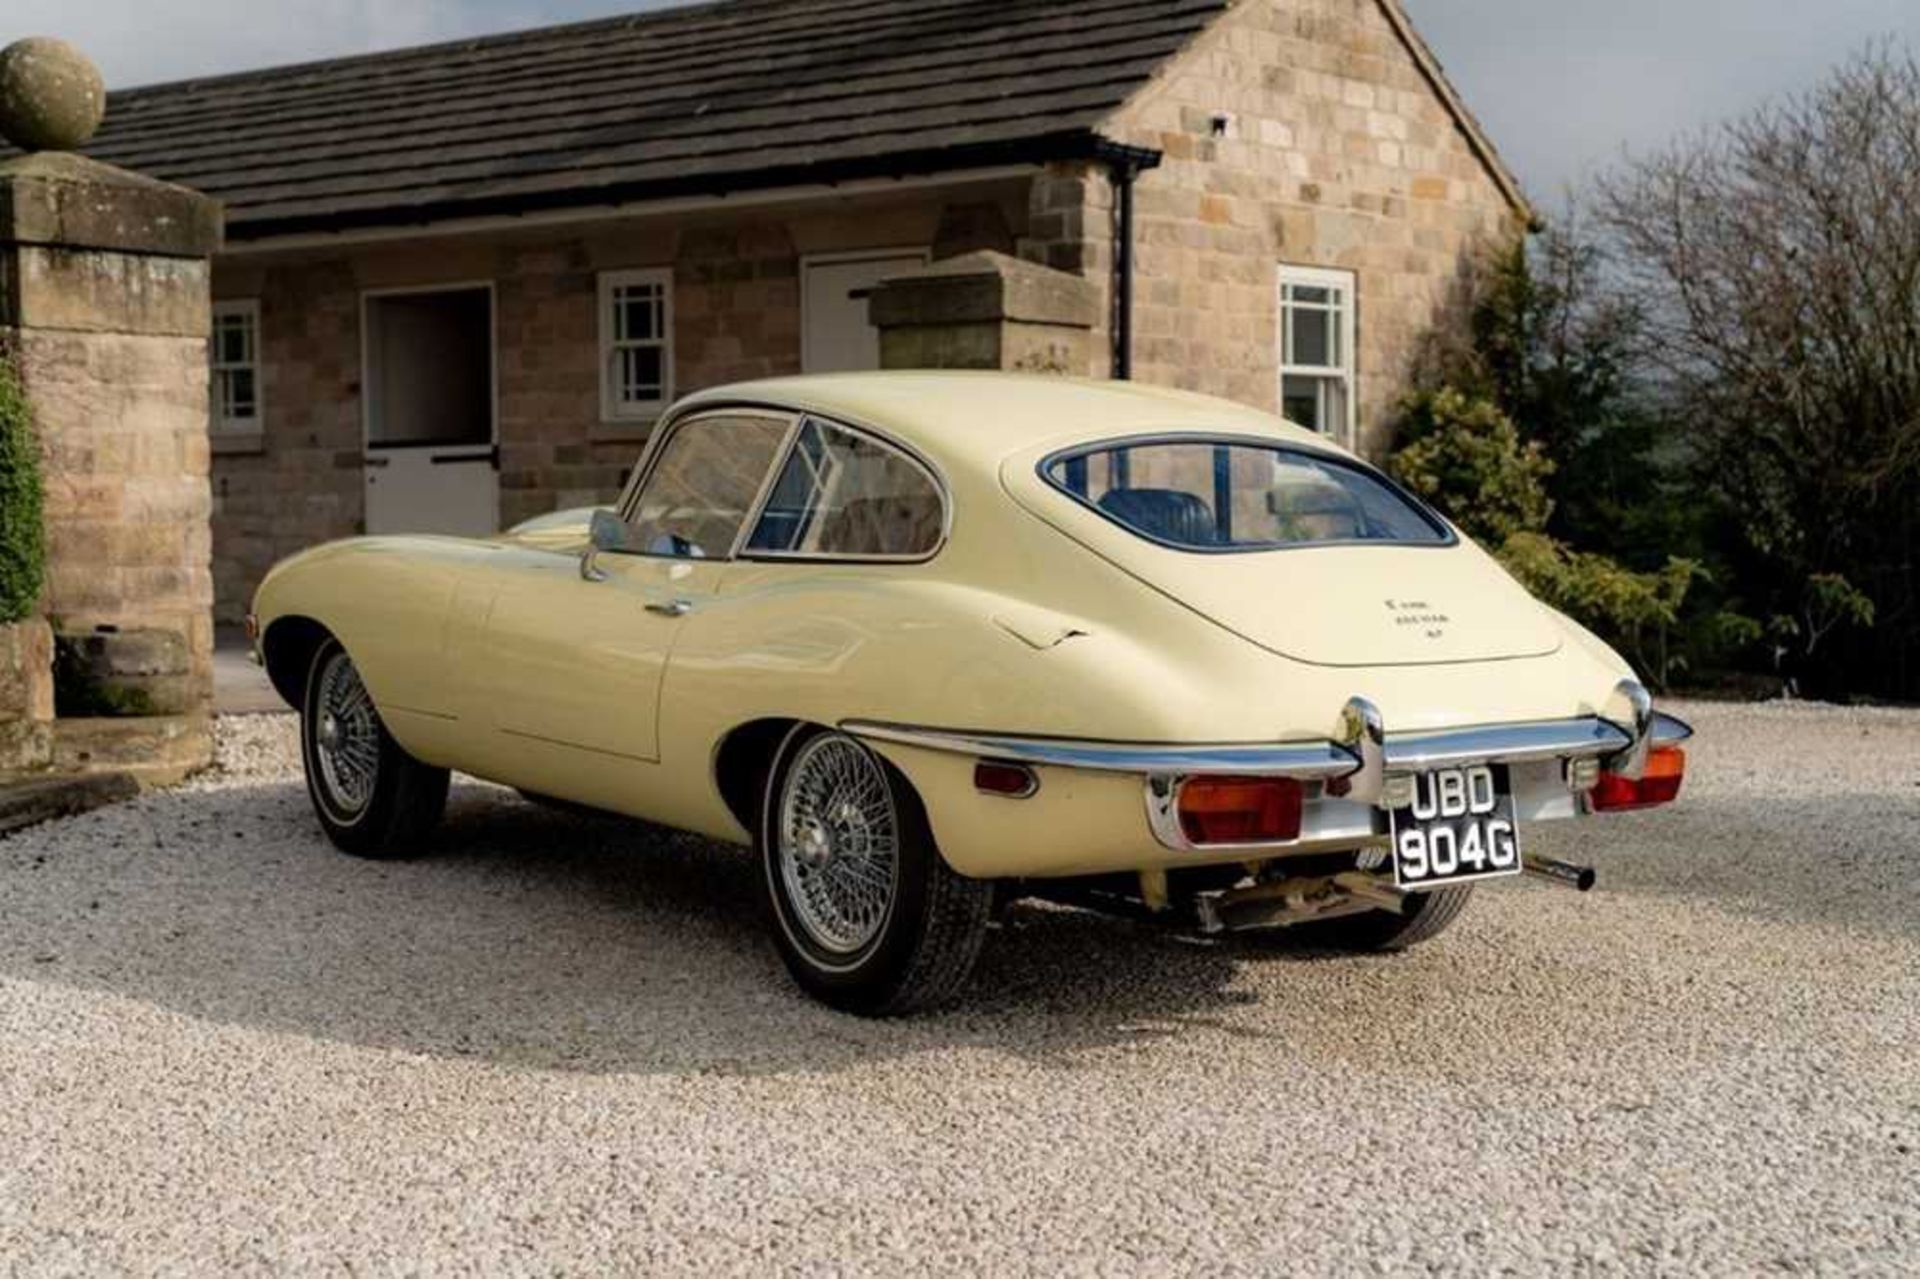 1968 Jaguar E-Type 4.2 Litre Coupe Genuine 44,000 miles from new - Image 4 of 68